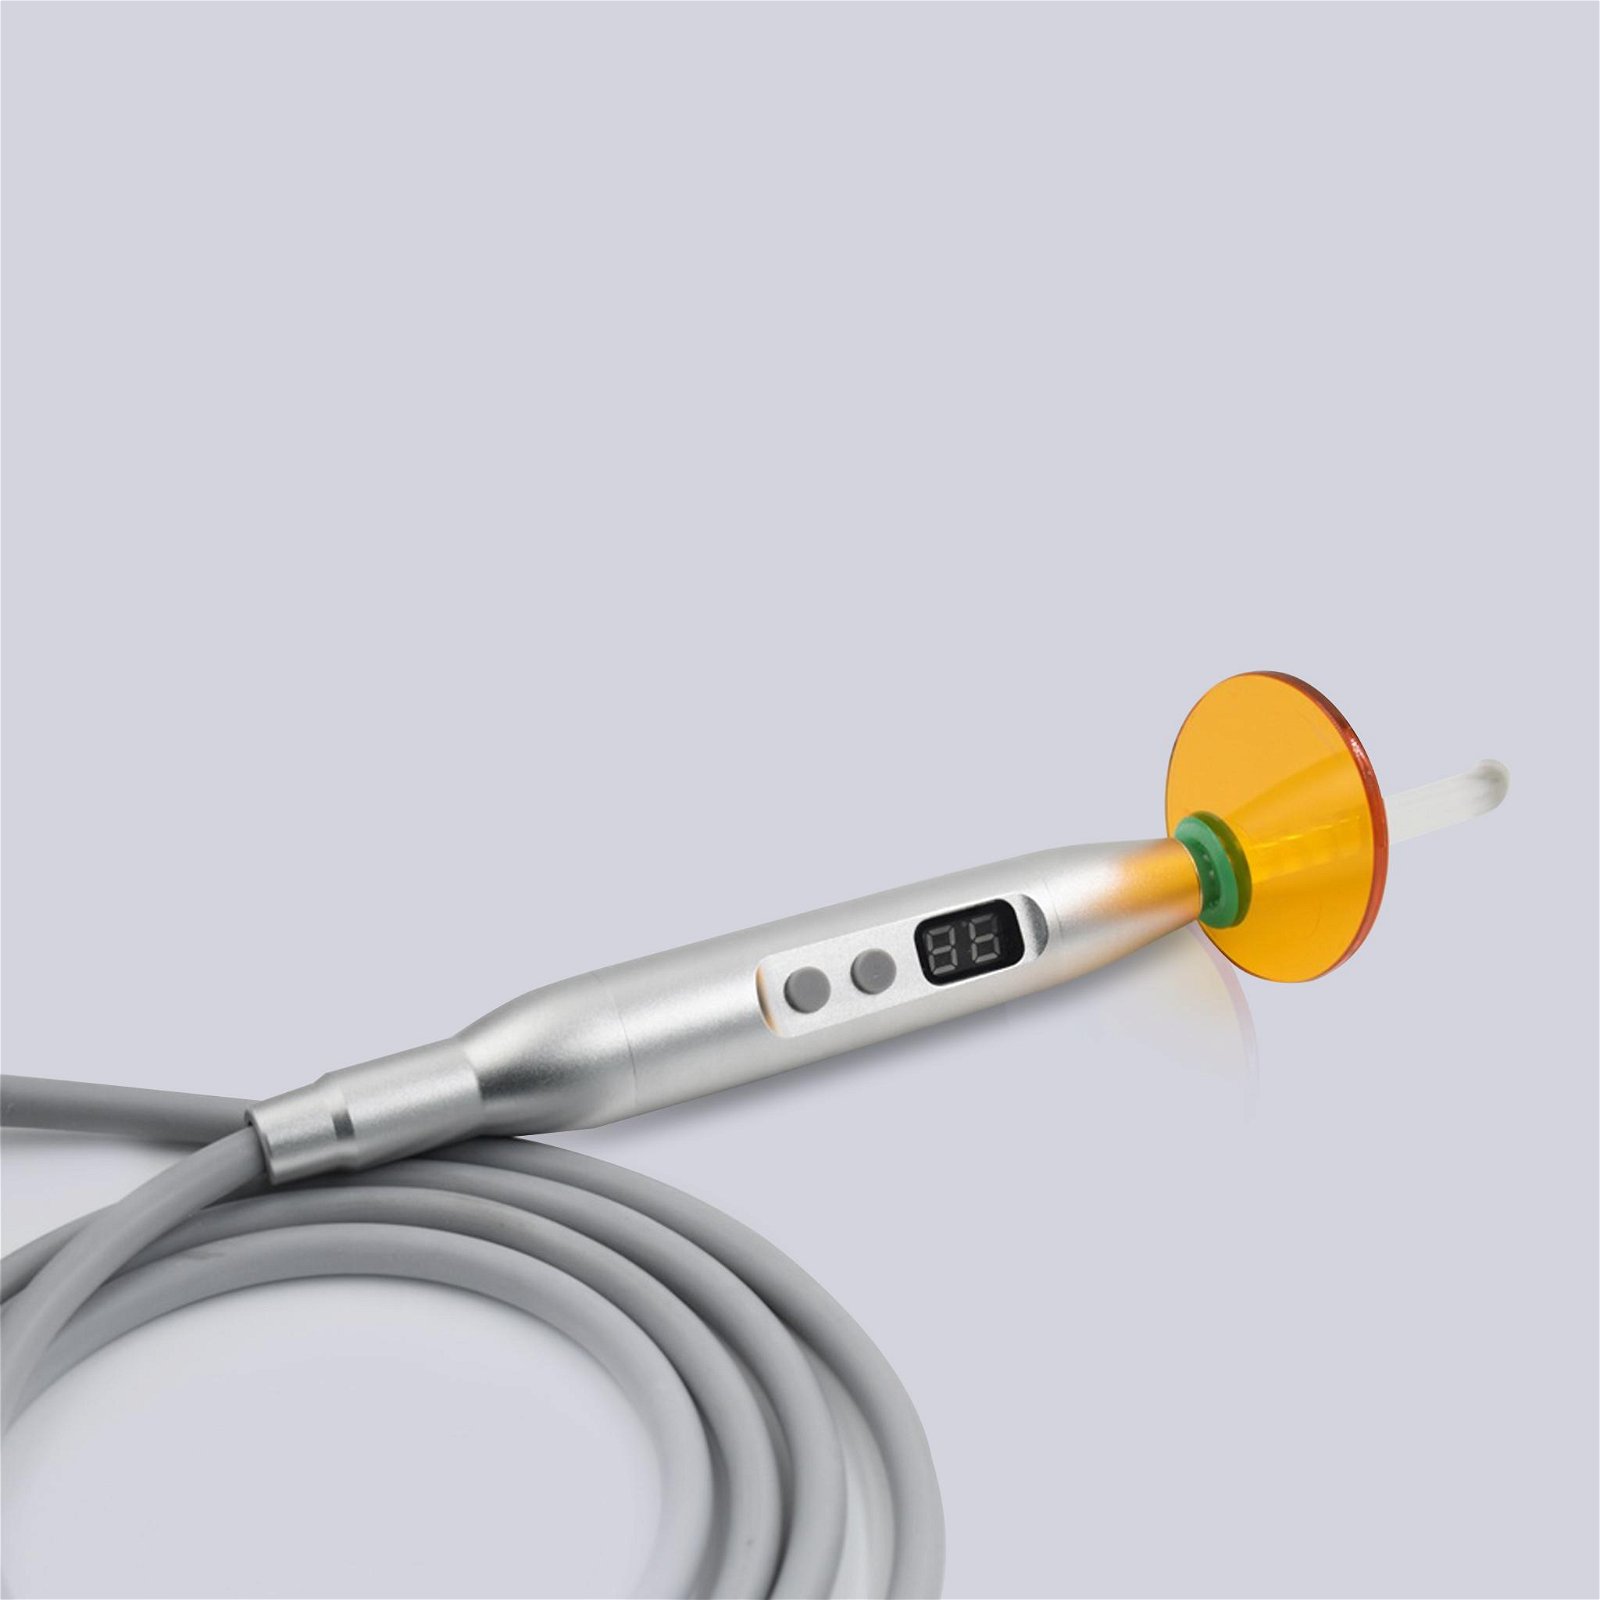 new 1 second curing light 24v wired dental curing light 4